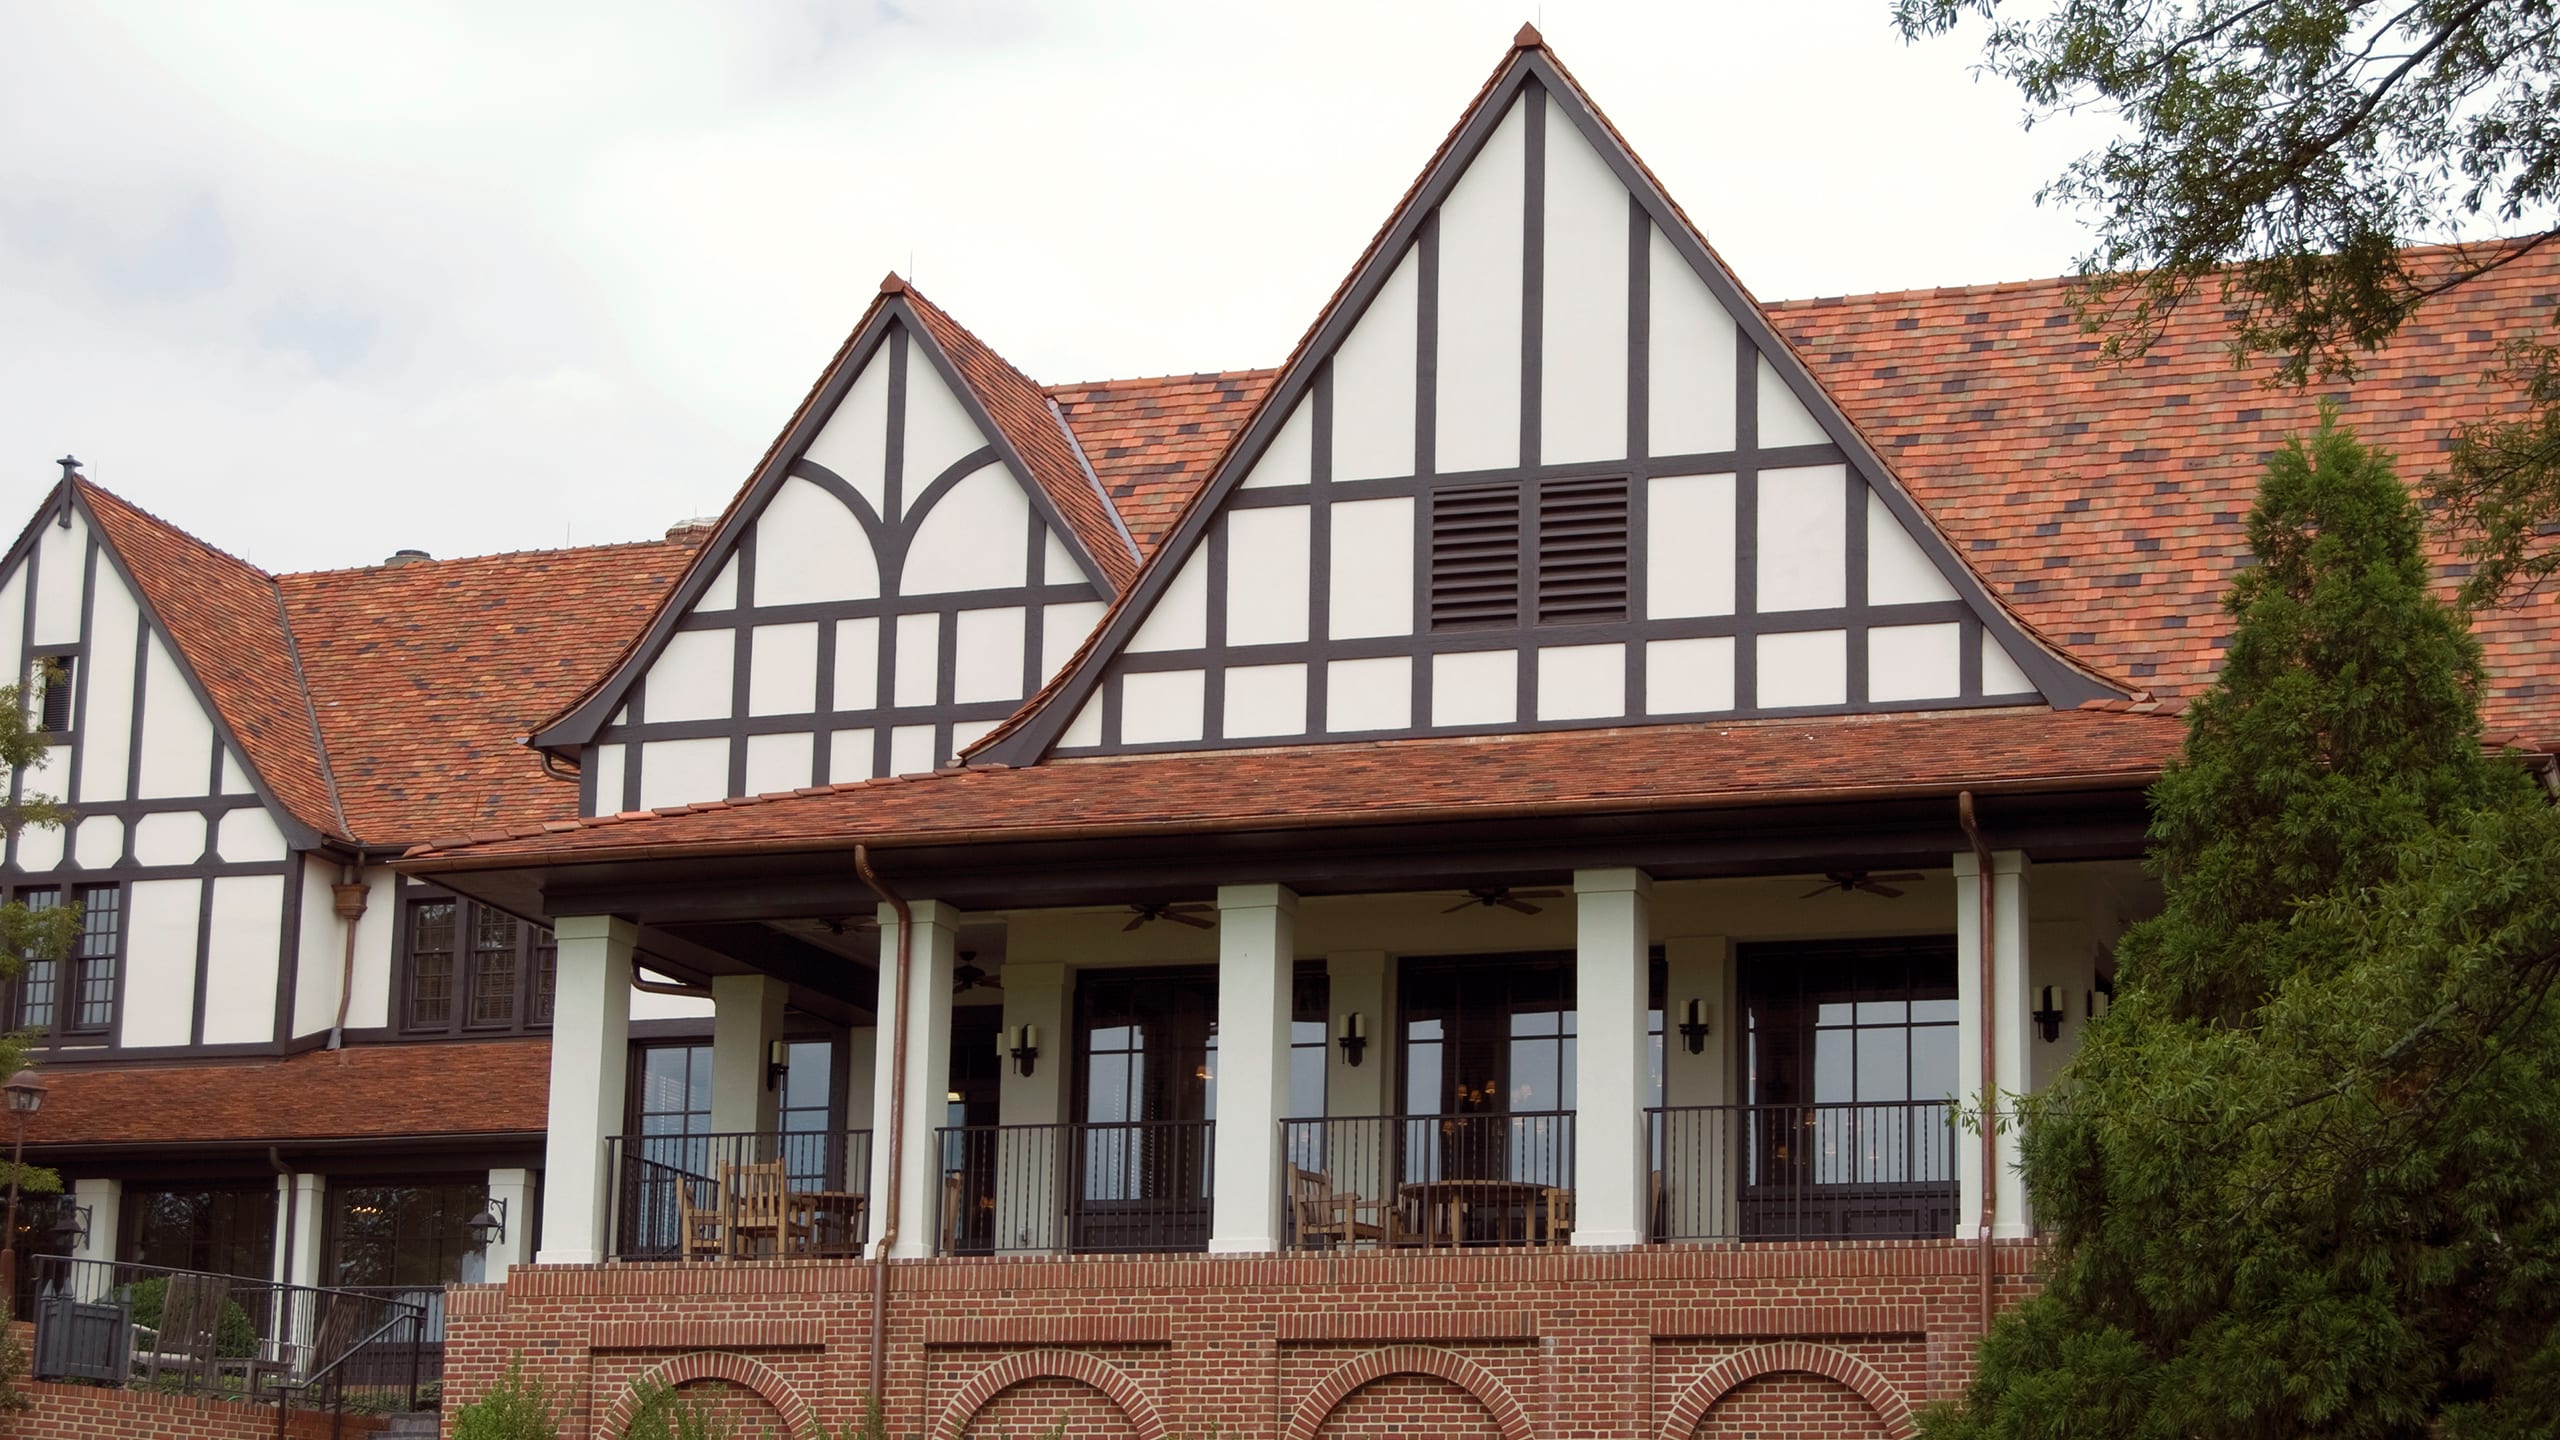 East Lake Golf Club Featuring Historic Custom Clay Shingle Tile from Ludowici